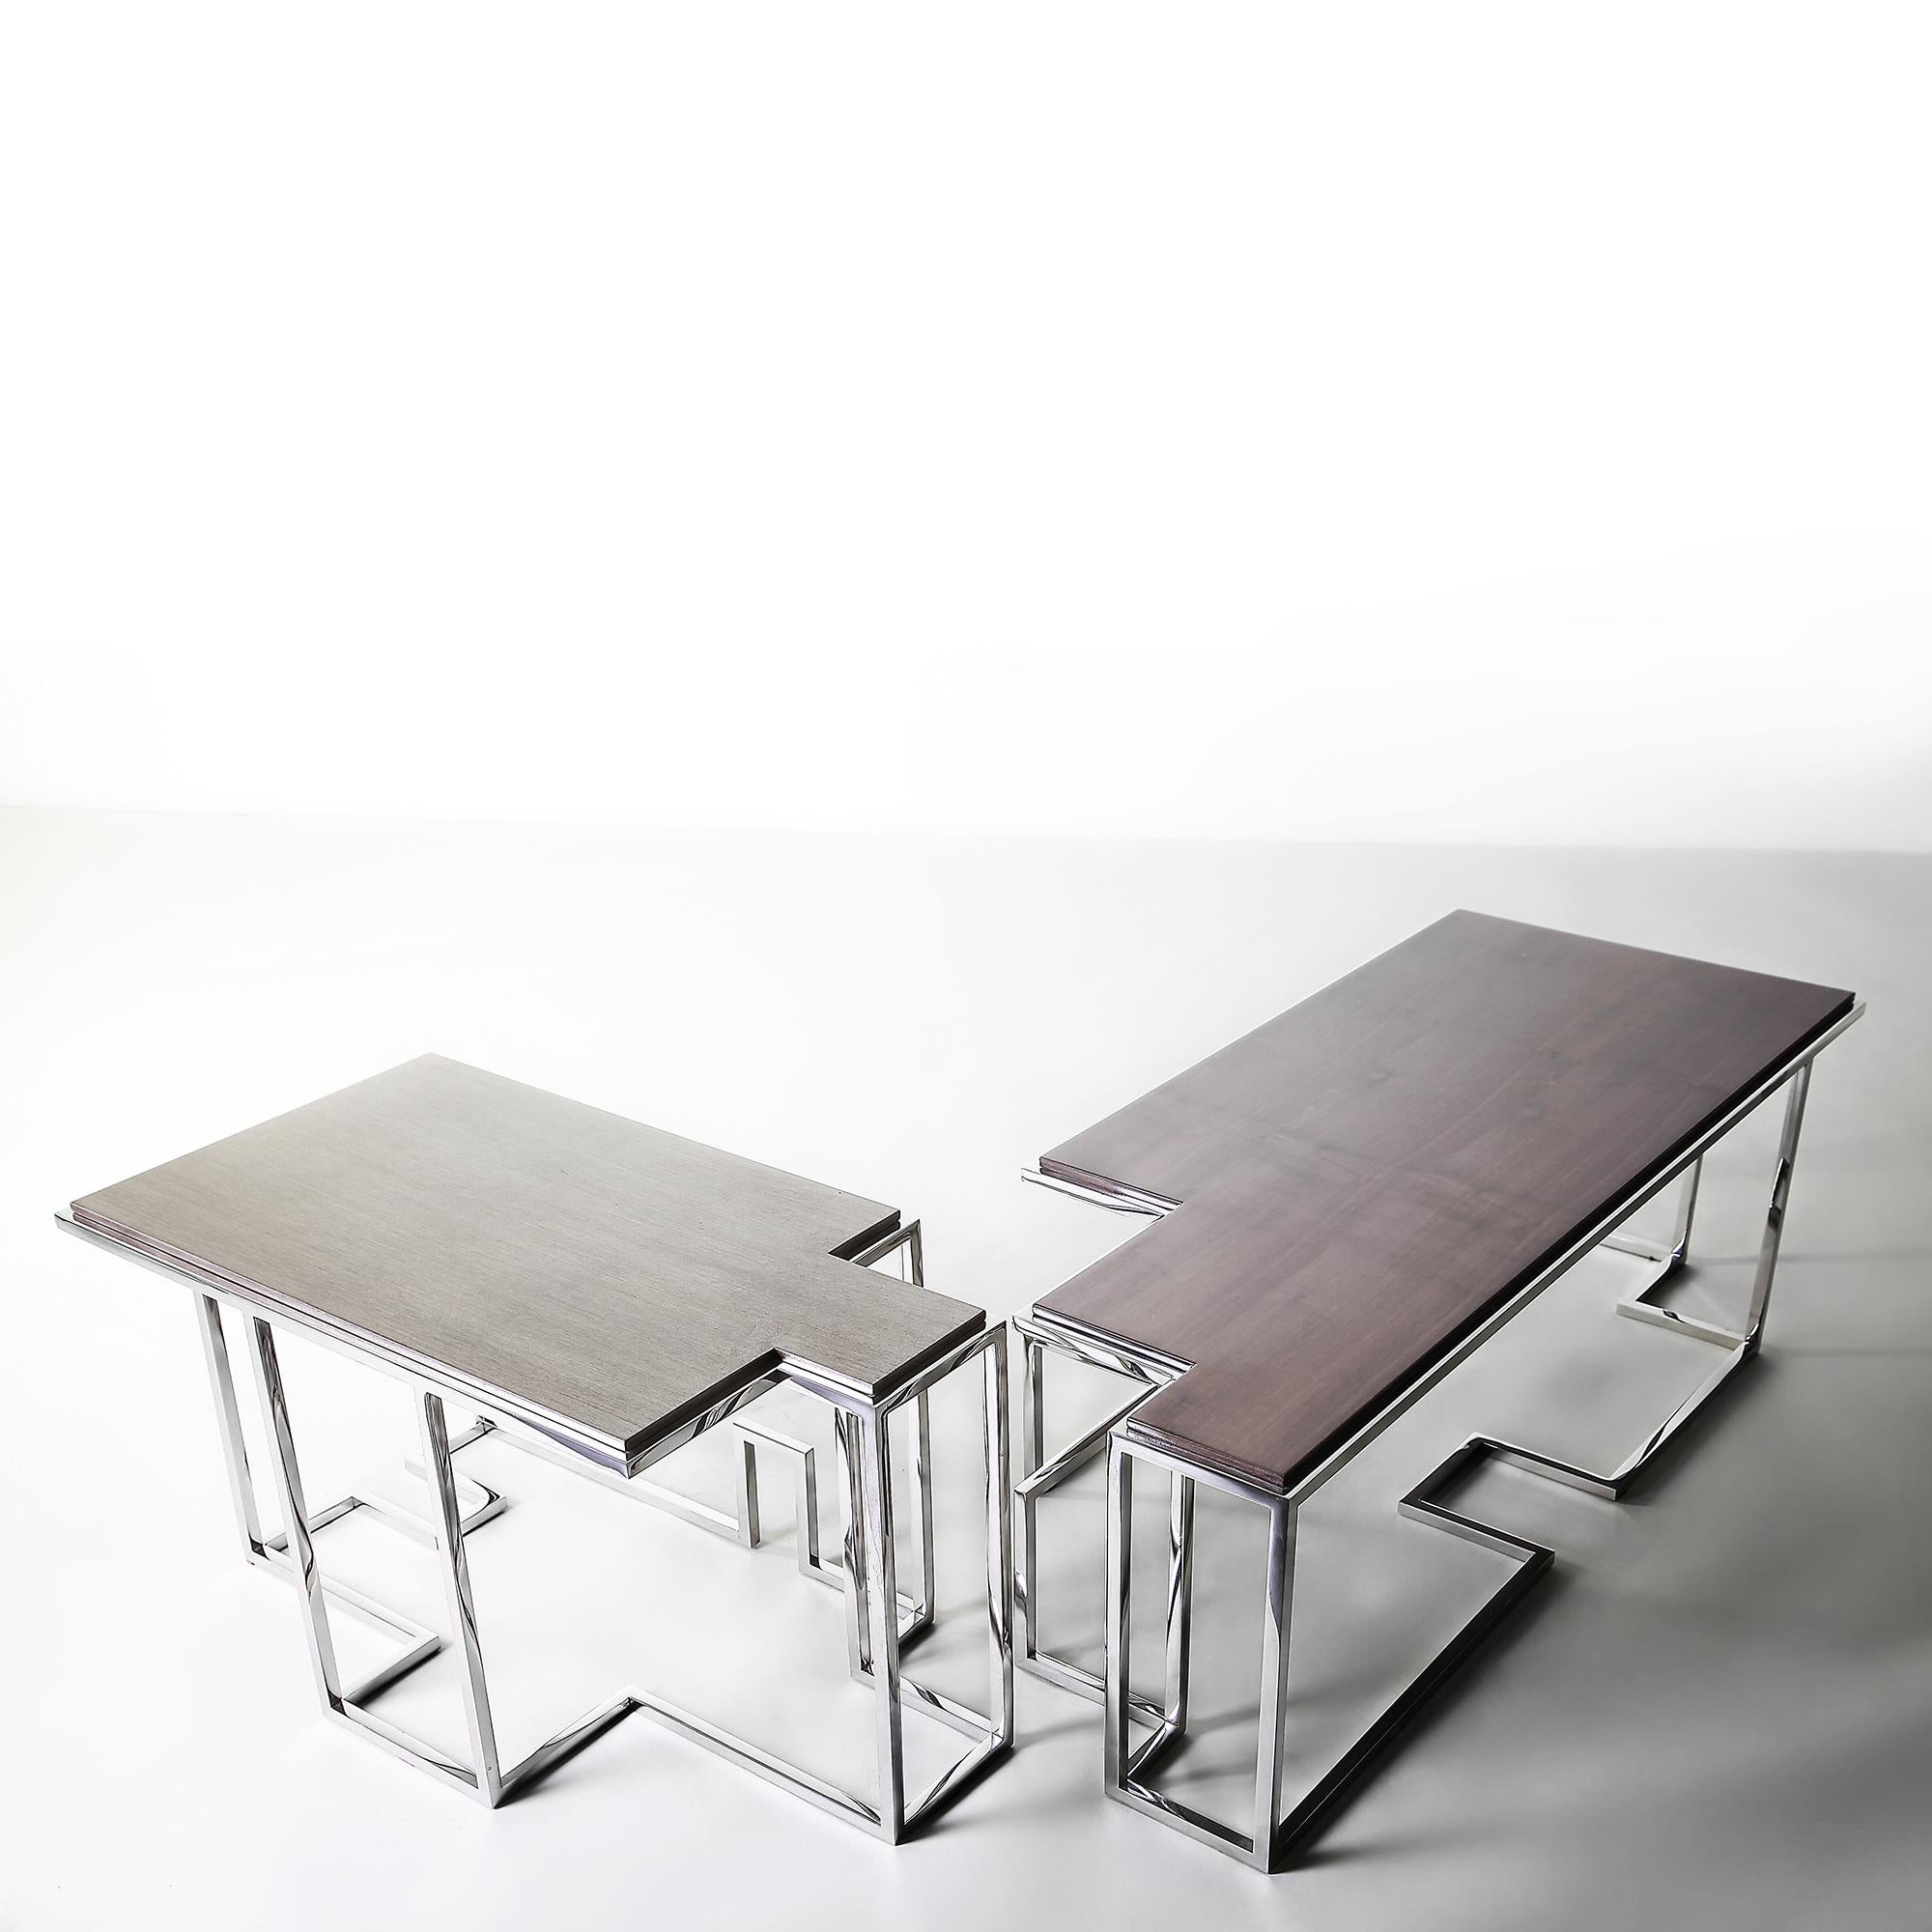 Small coffee table from the playful set of Tetra coffee tables that can be placed in a number of different layouts depending on the room arrangement.
By Georges Amatoury Studio, 2014.